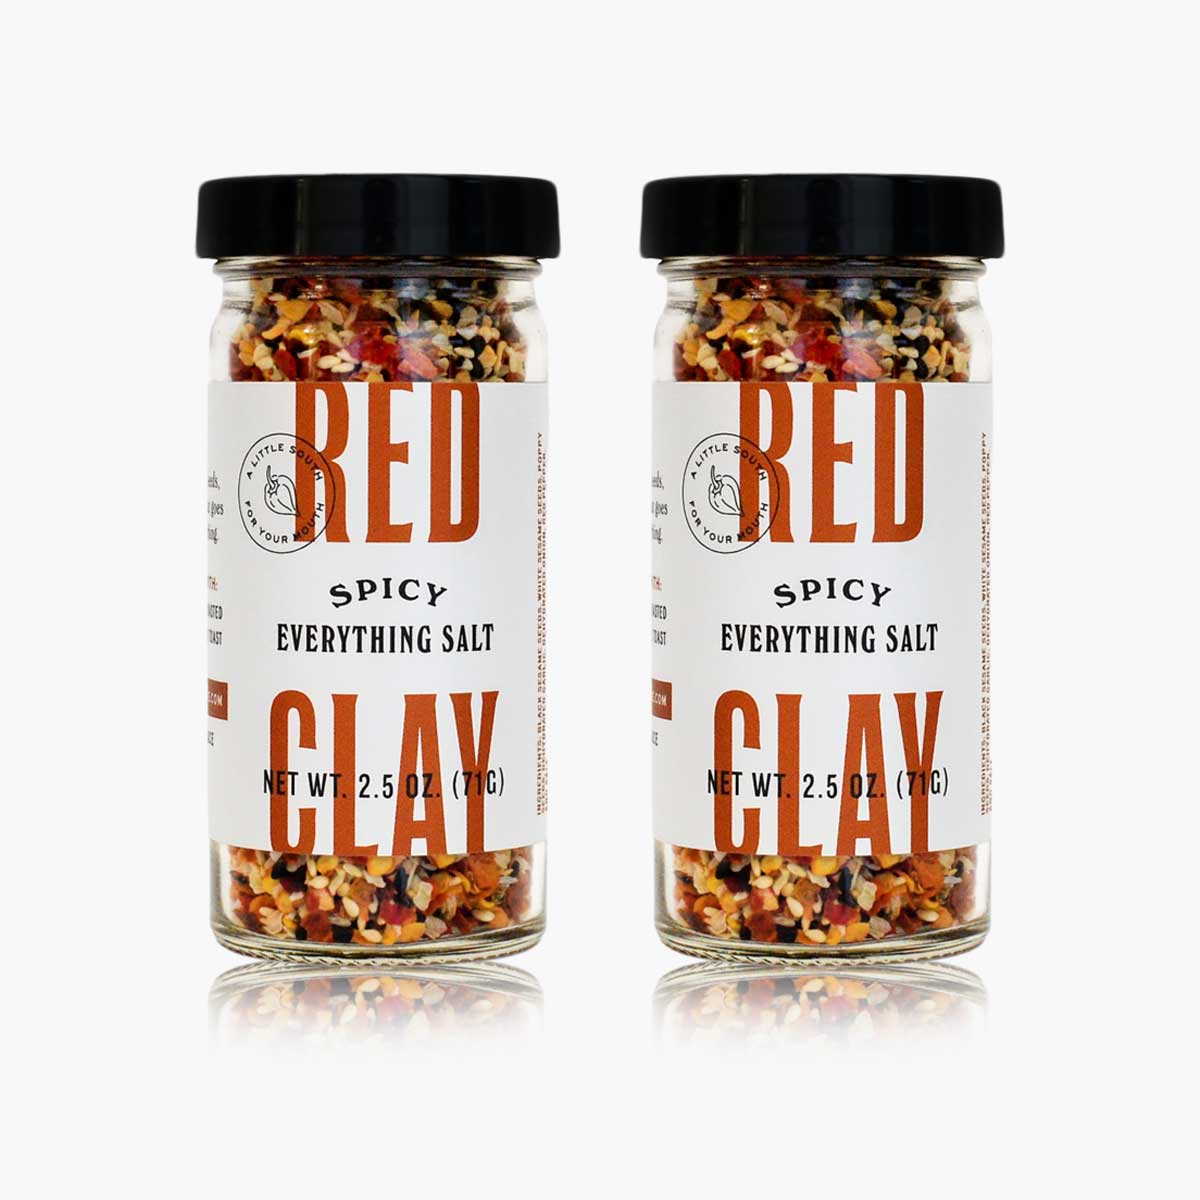 Two bottles of Red Clay Spicy Everything Salt